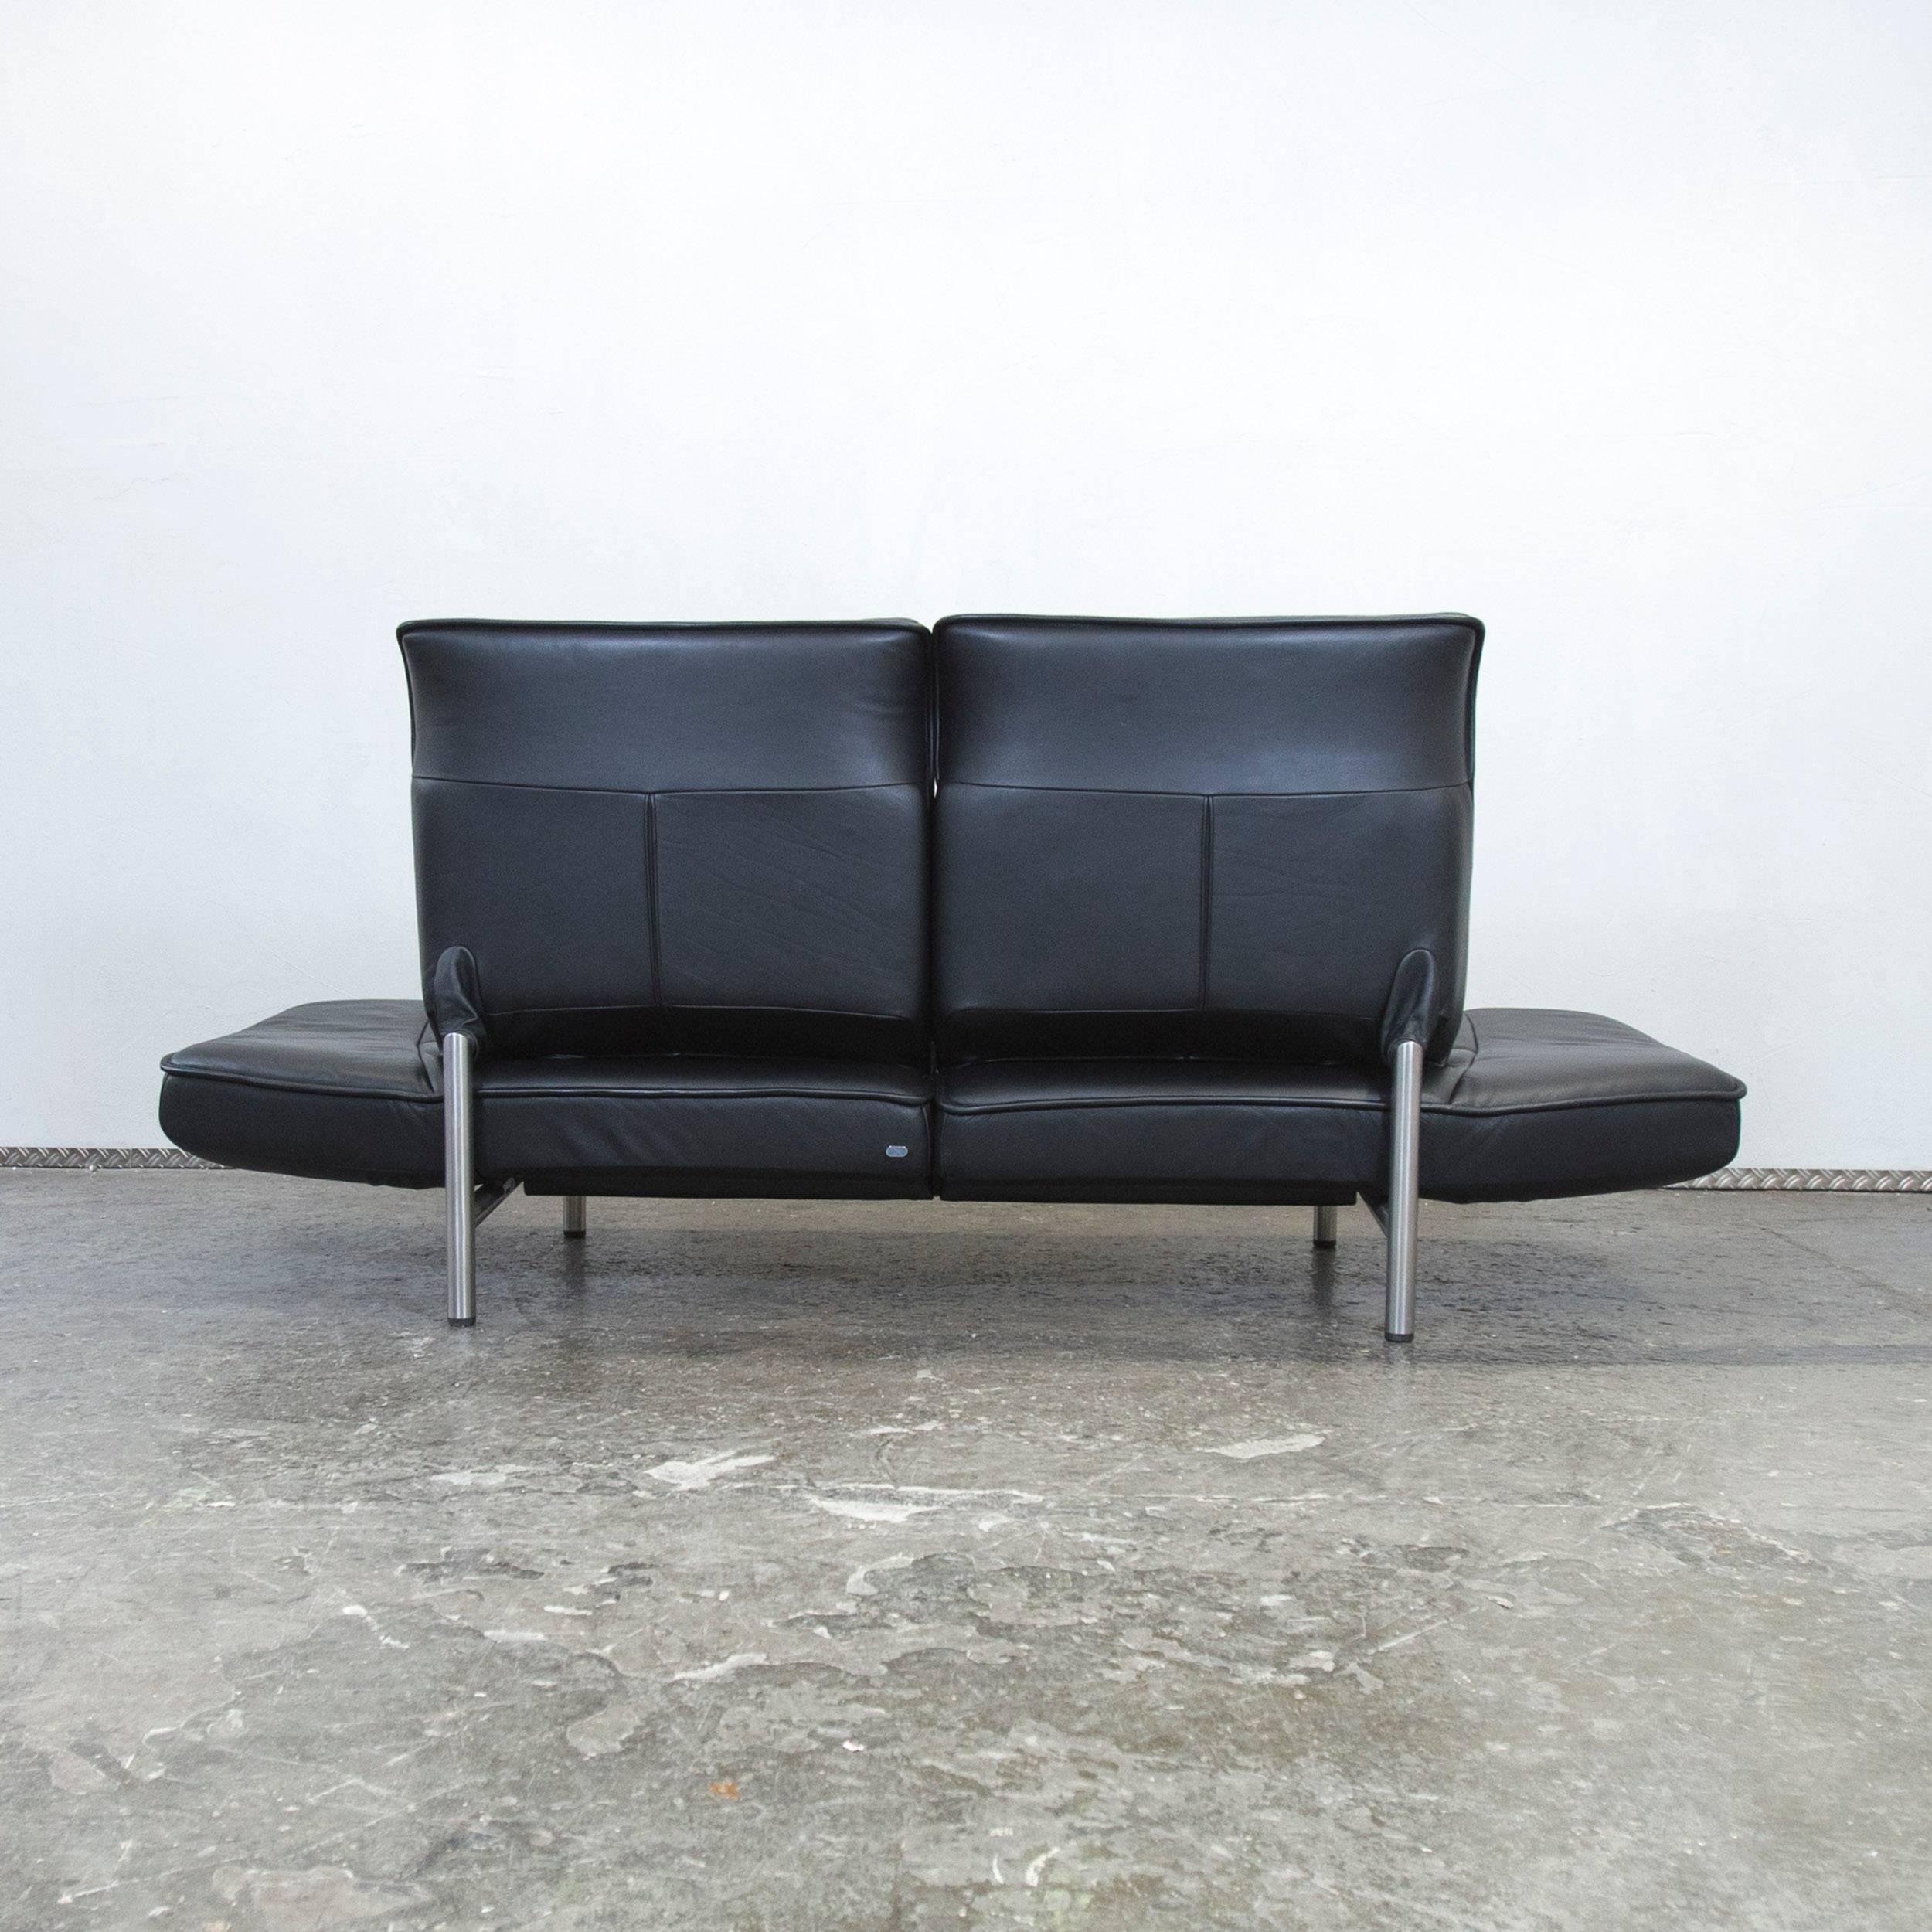 de Sede Ds 450 Designer Leather Sofa Black Relax Function Two-Seat Modern 4